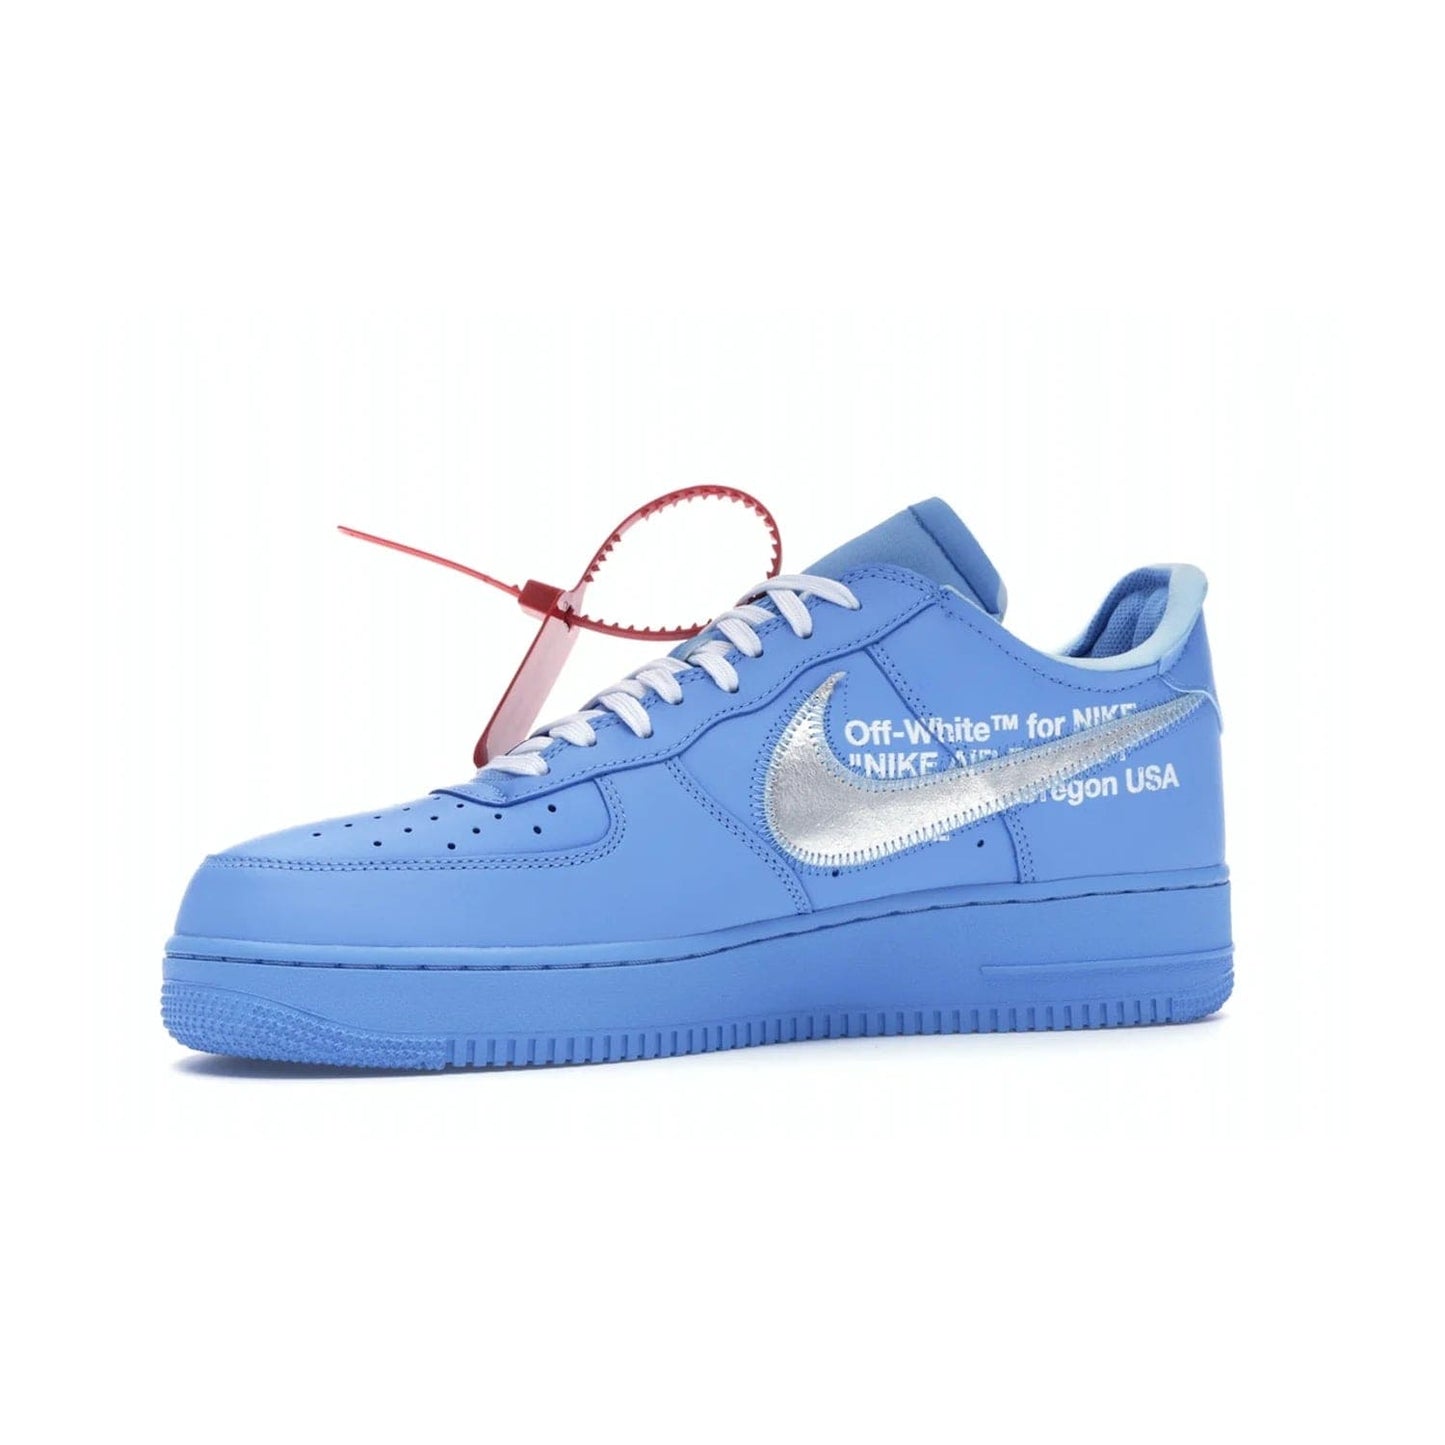 Nike Air Force 1 Low Off-White MCA University Blue - Image 17 - Only at www.BallersClubKickz.com - Virgil Abloh's Air Force 1 Low Off-White MCA University Blue: Features University Blue leather and midsole, reflective silver Nike Swoosh, red zip tie, white laces, and iconic Off-White™ branding. A must-have for any Virgil Abloh enthusiast.